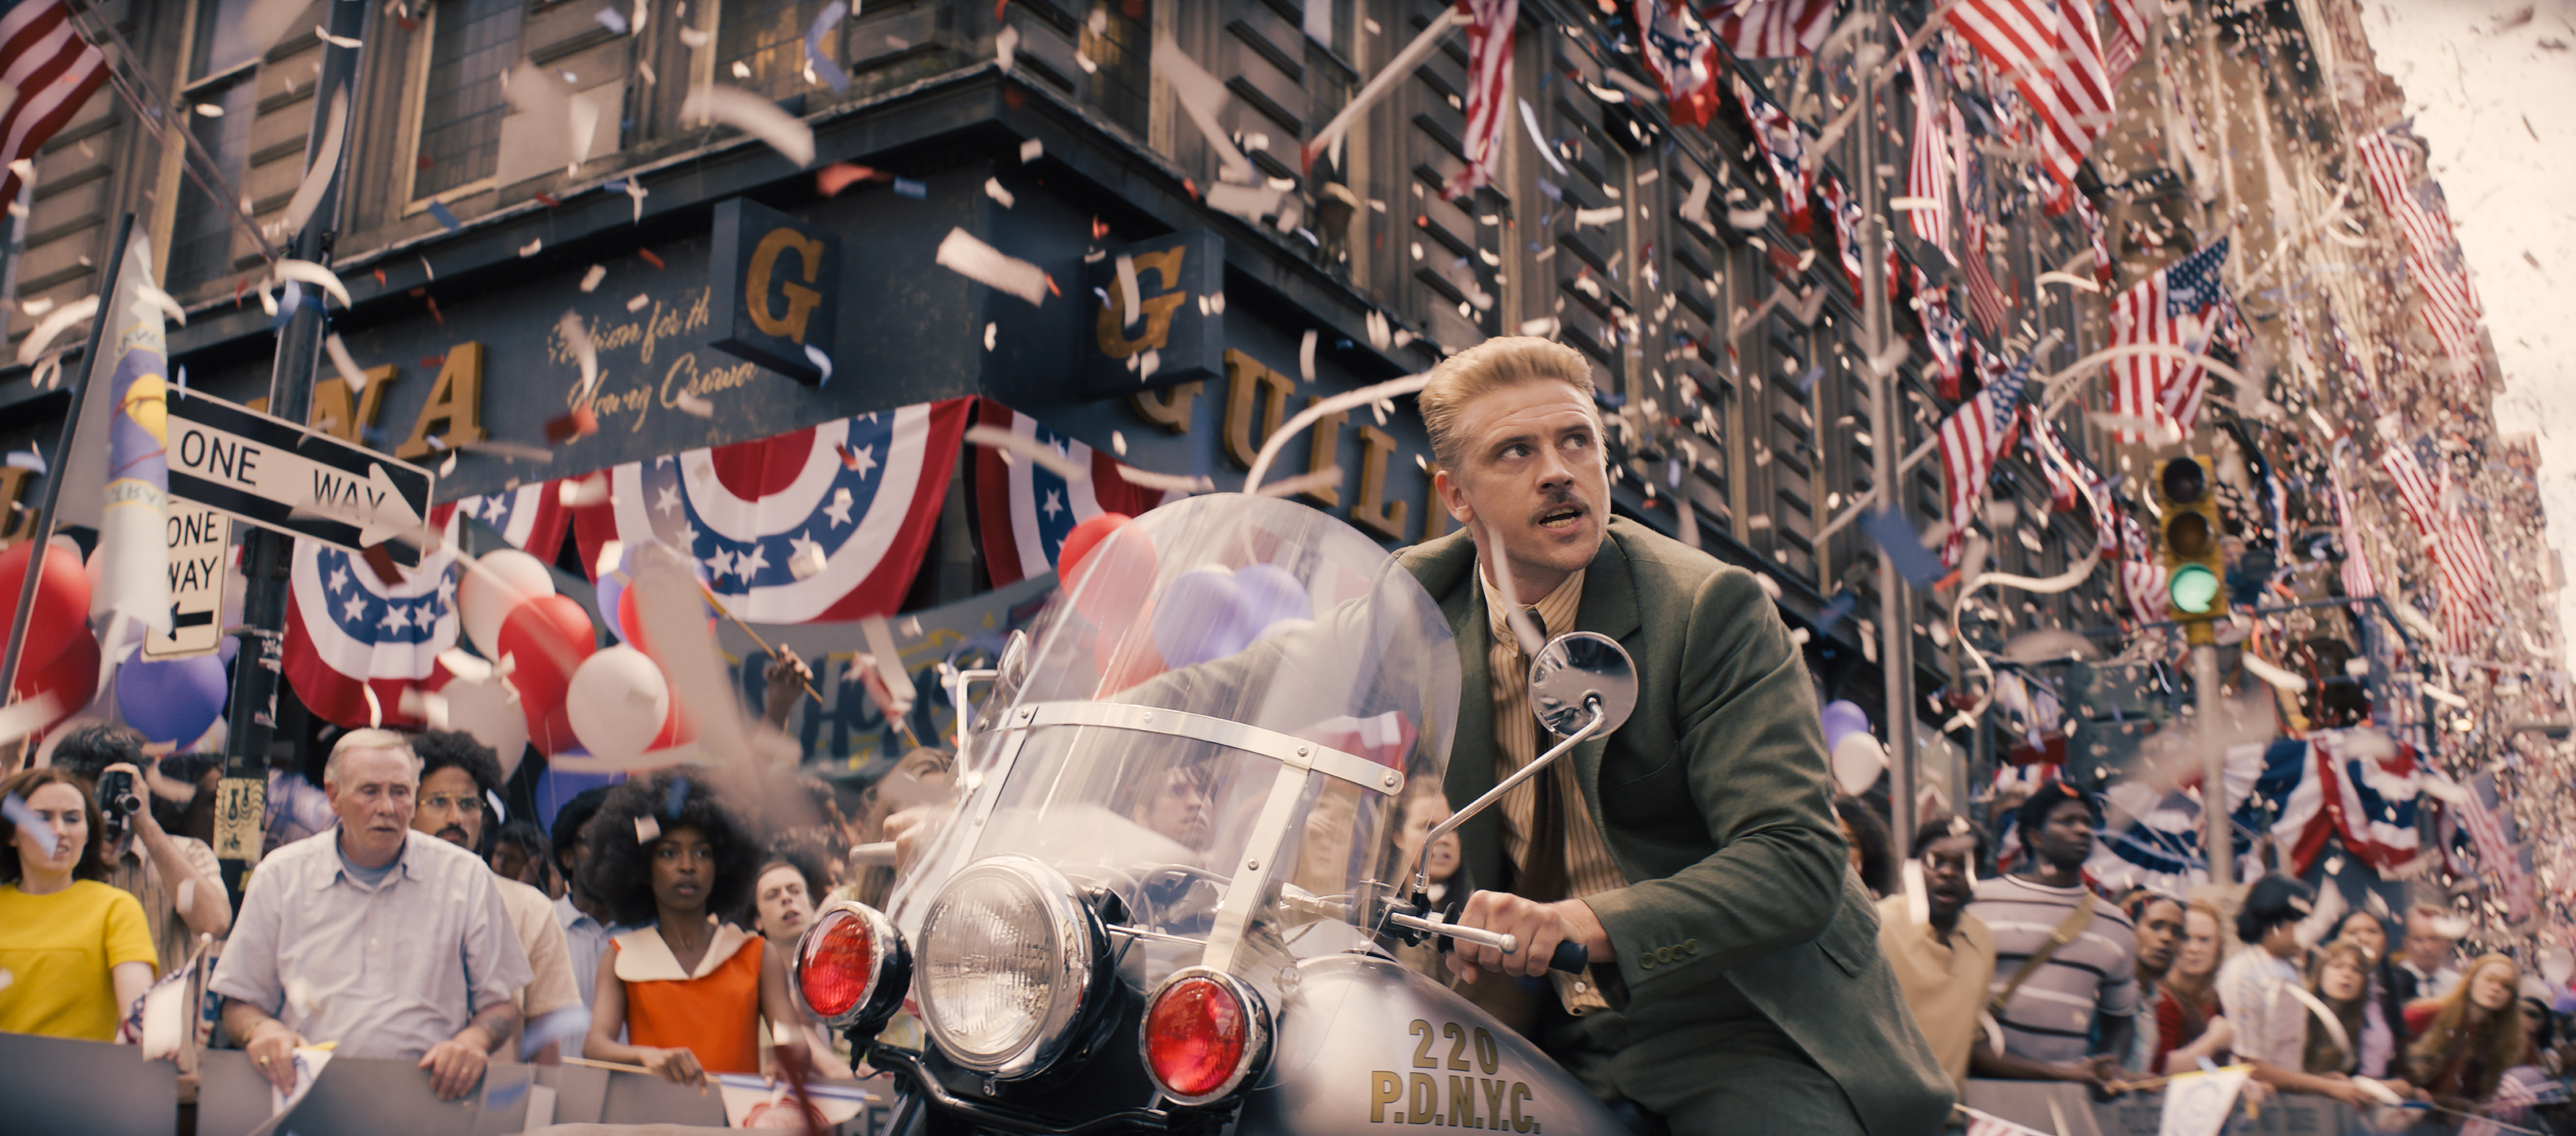 HD wallpaper of Indiana Jones and the Dial of Destiny featuring a character in a festive parade scene with American flags and confetti, ideal for desktop background.